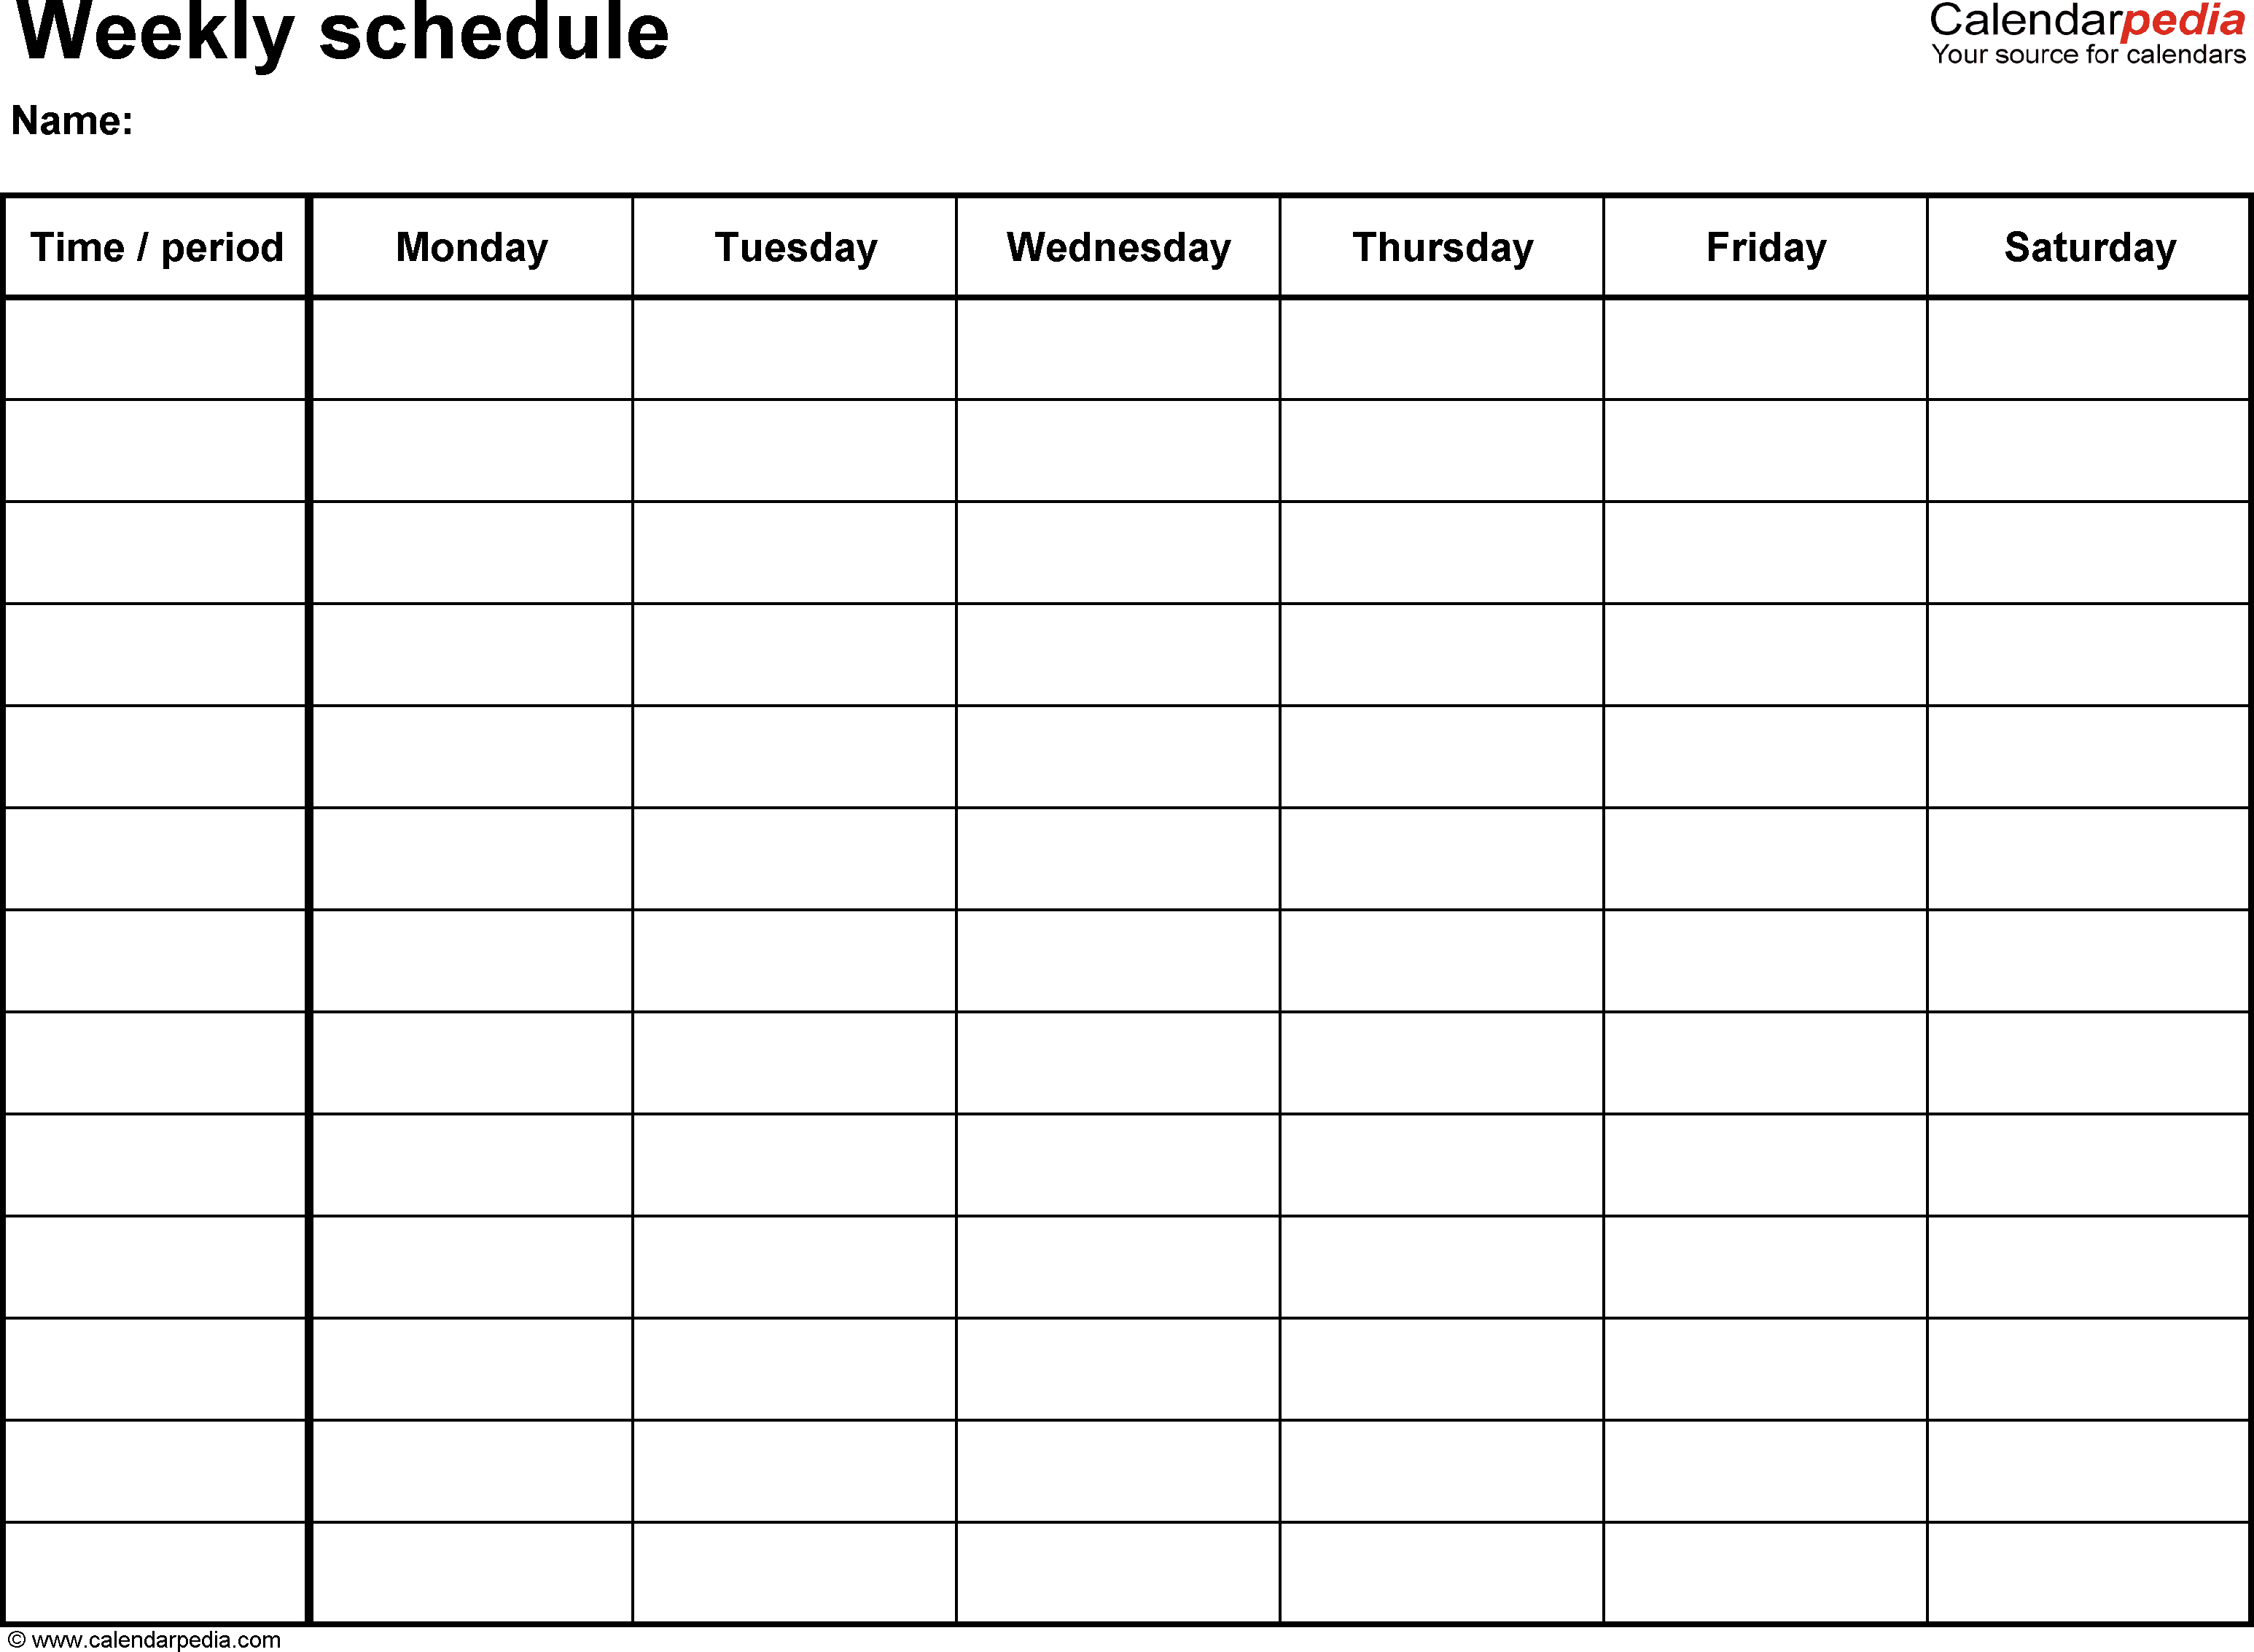 Free Weekly Schedule Templates For Pdf - 18 Templates - Free Printable Weekly Work Schedule